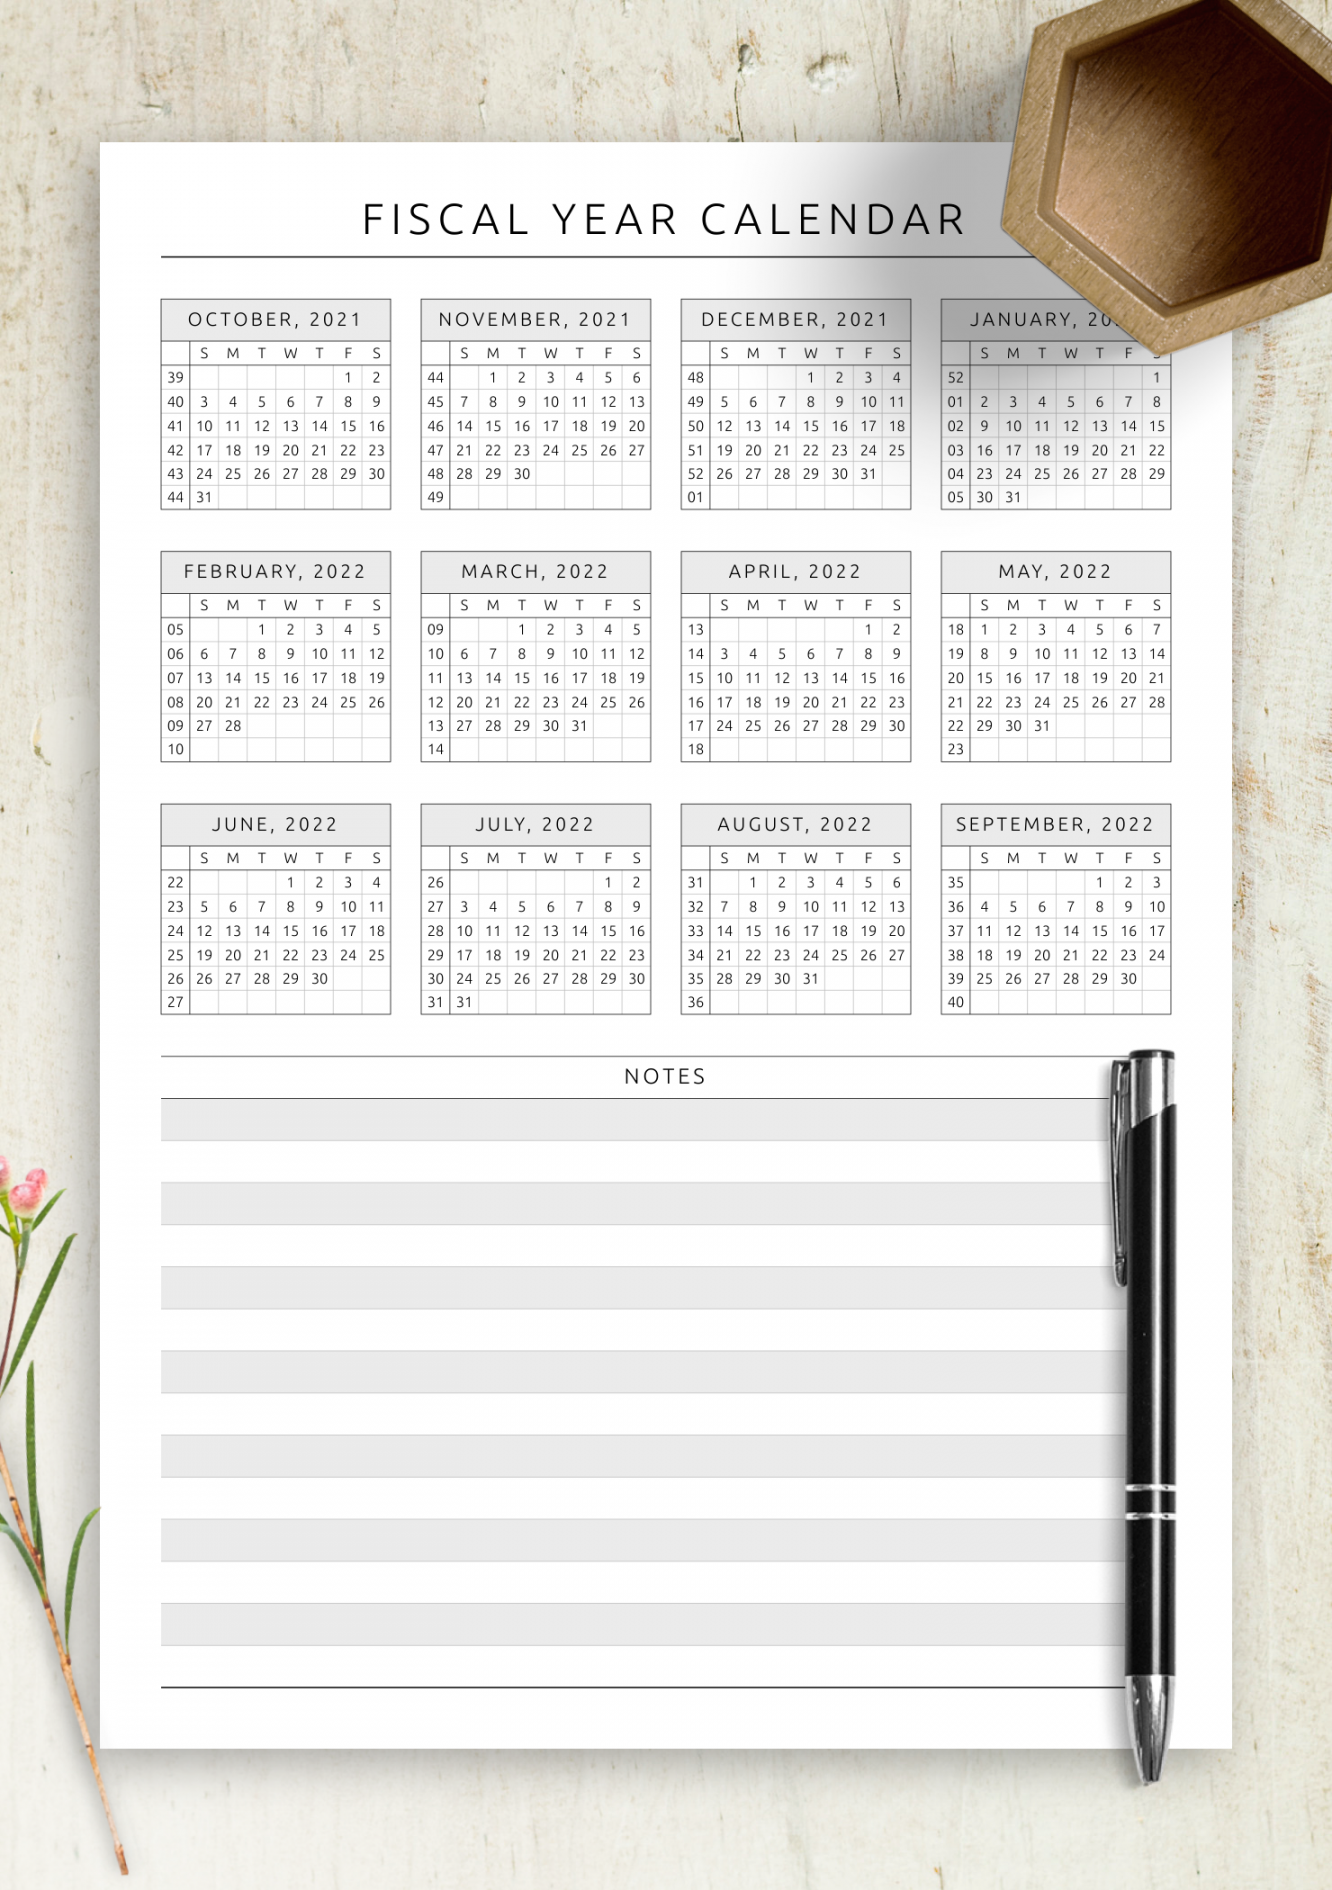 Download Printable Fiscal Year Calendar Template PDF